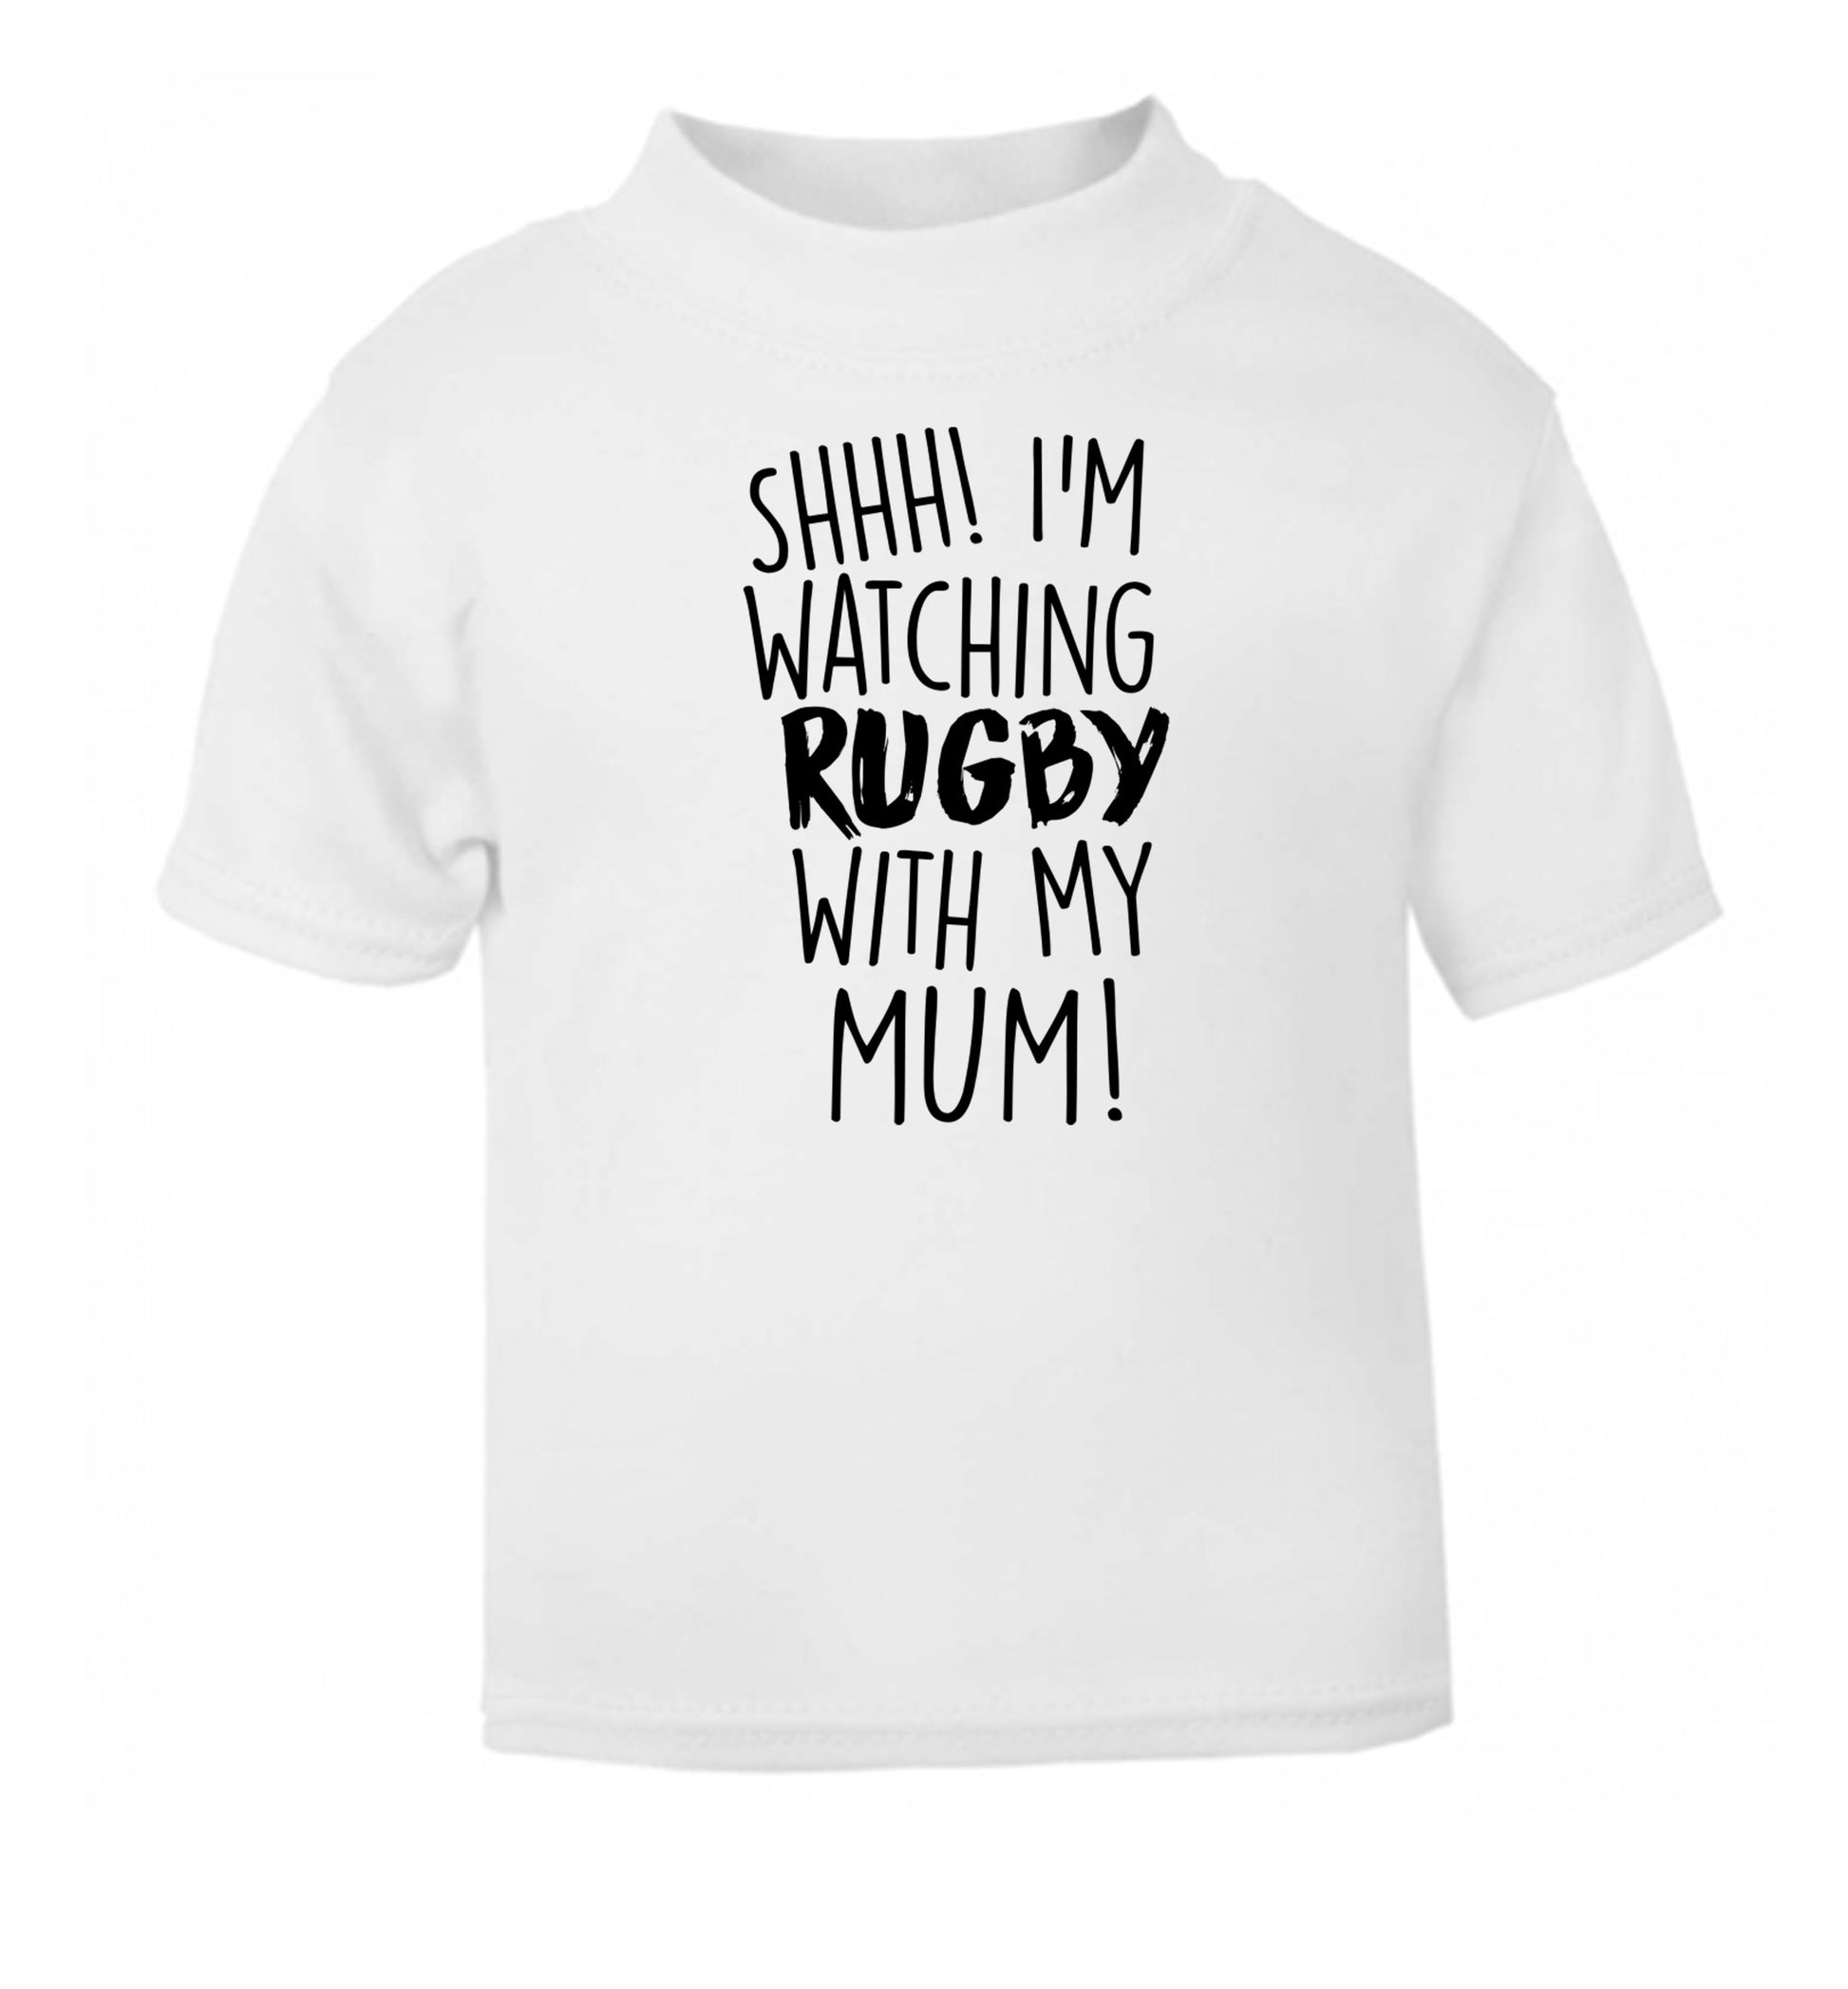 Shh... I'm watching rugby with my mum white Baby Toddler Tshirt 2 Years